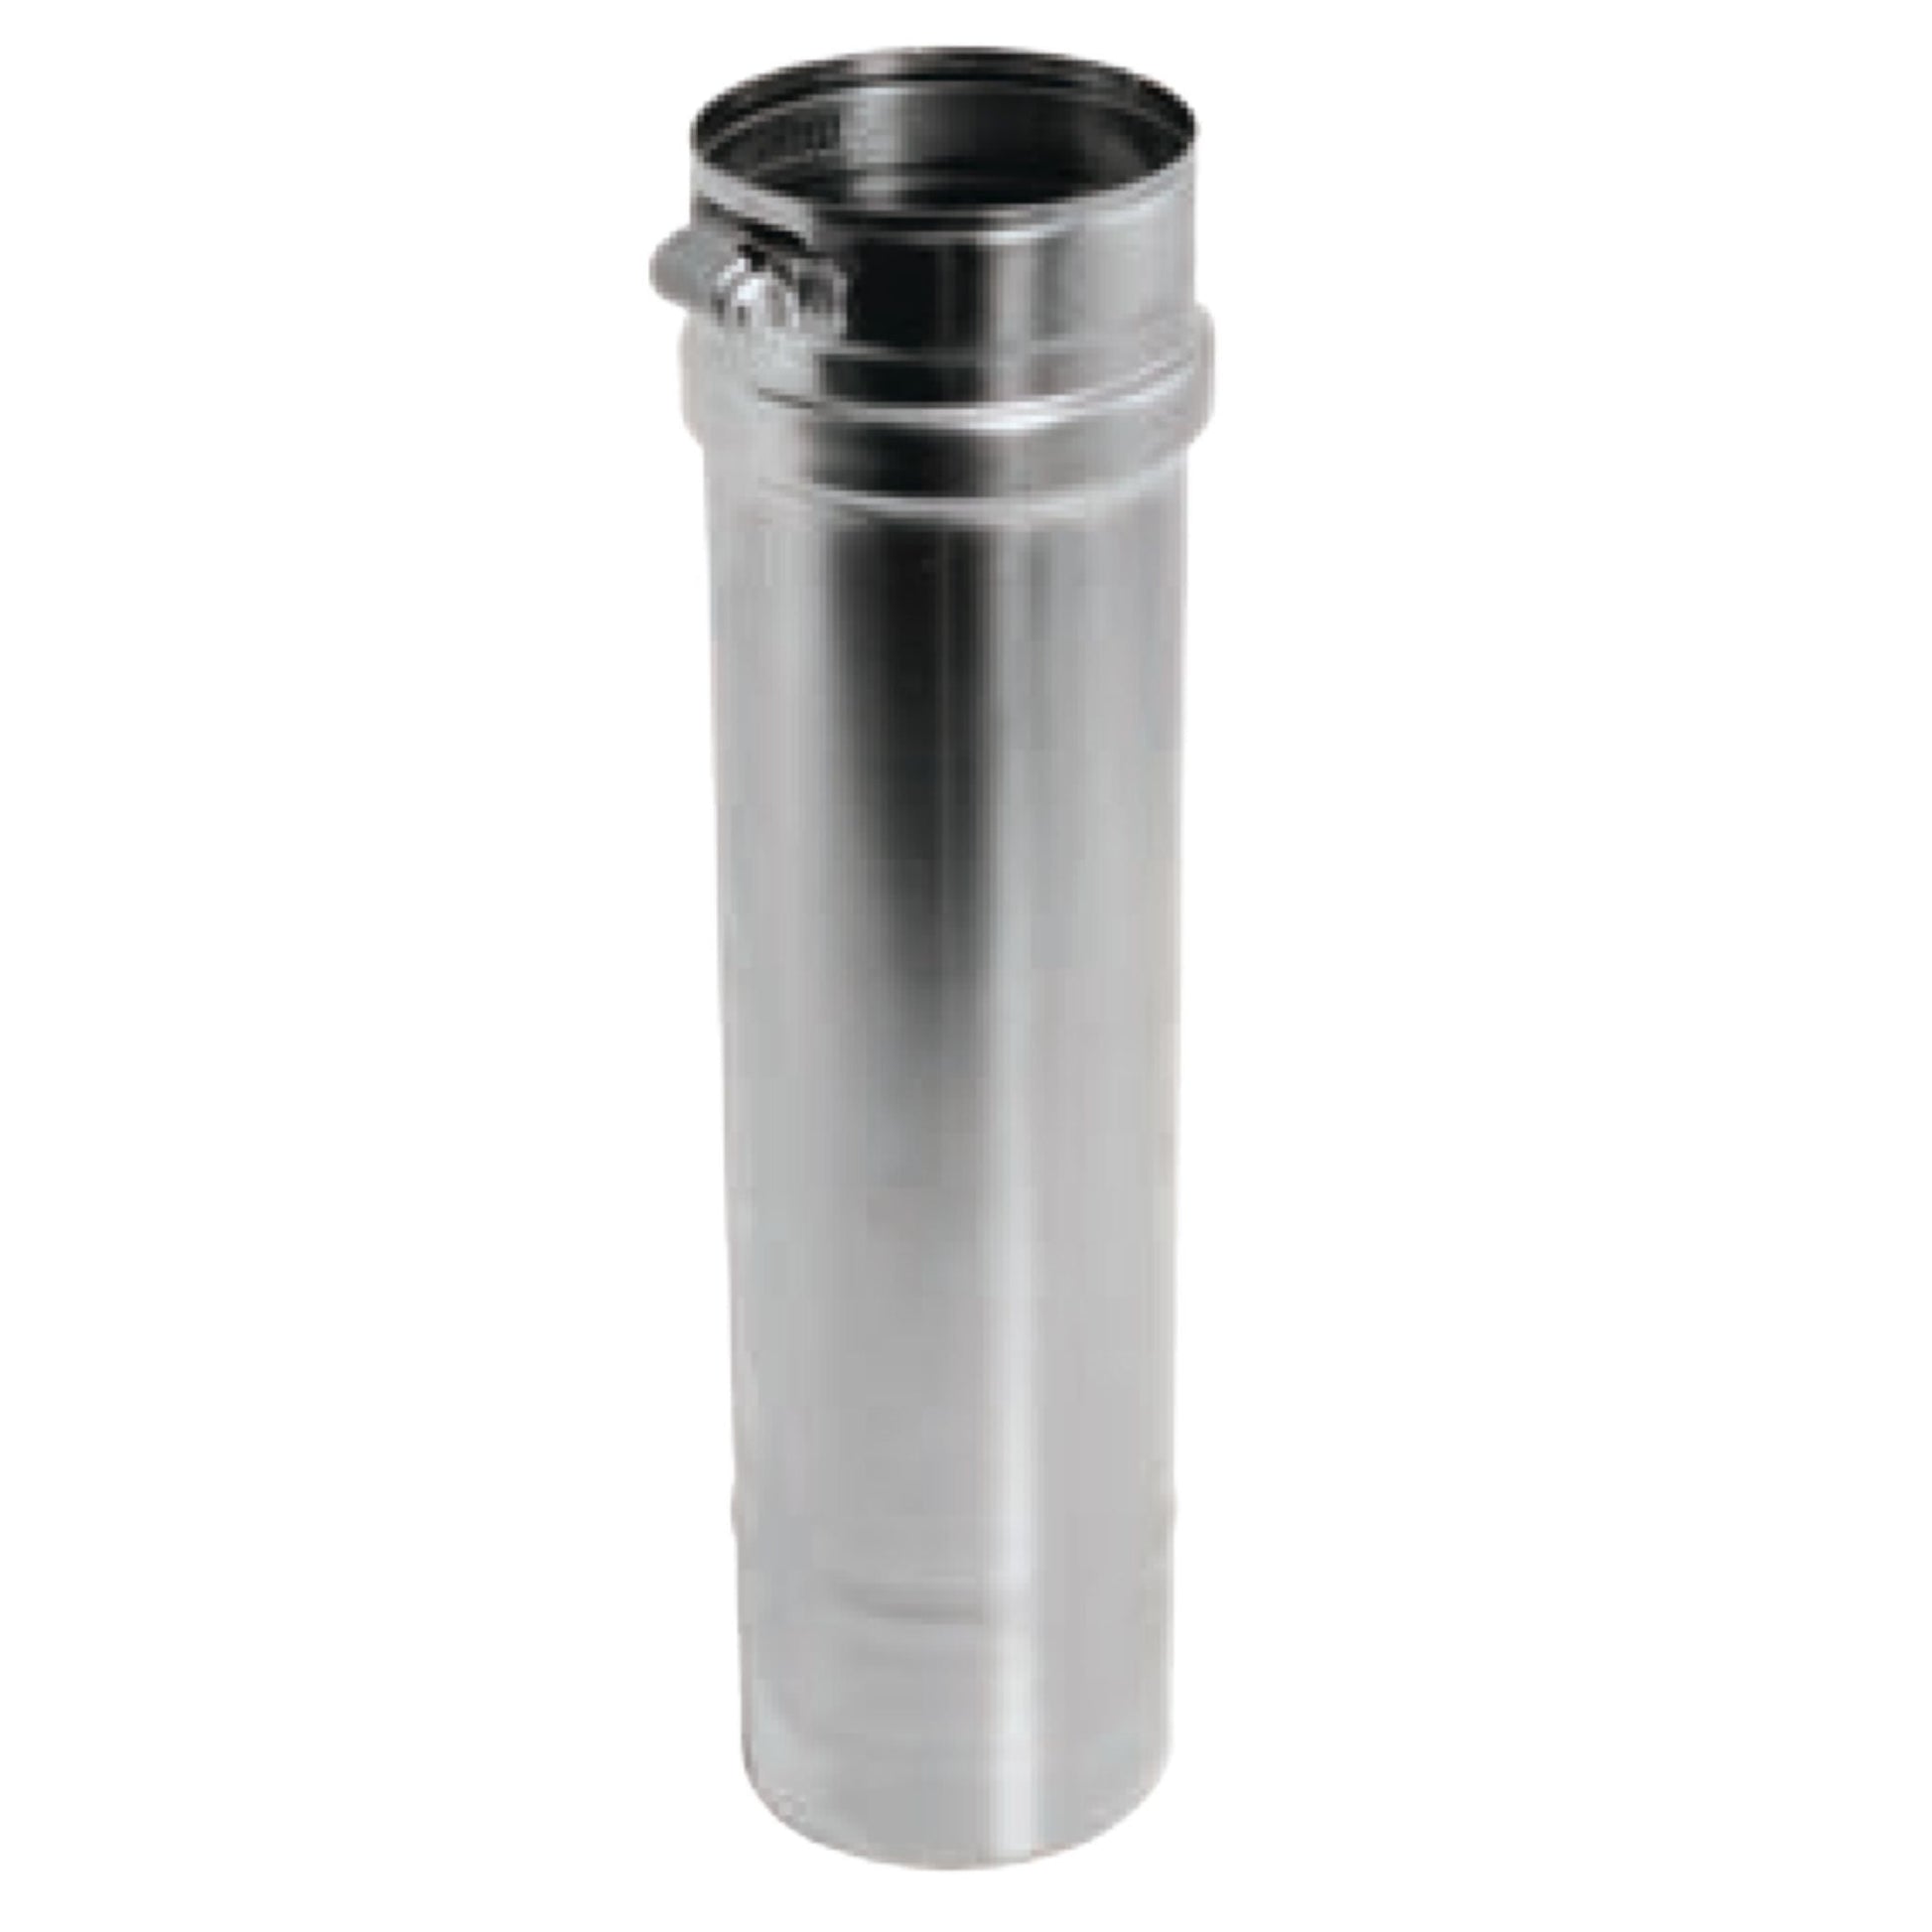 DuraVent FasNSeal 9" x 6" 316L Stainless Steel Vent Length